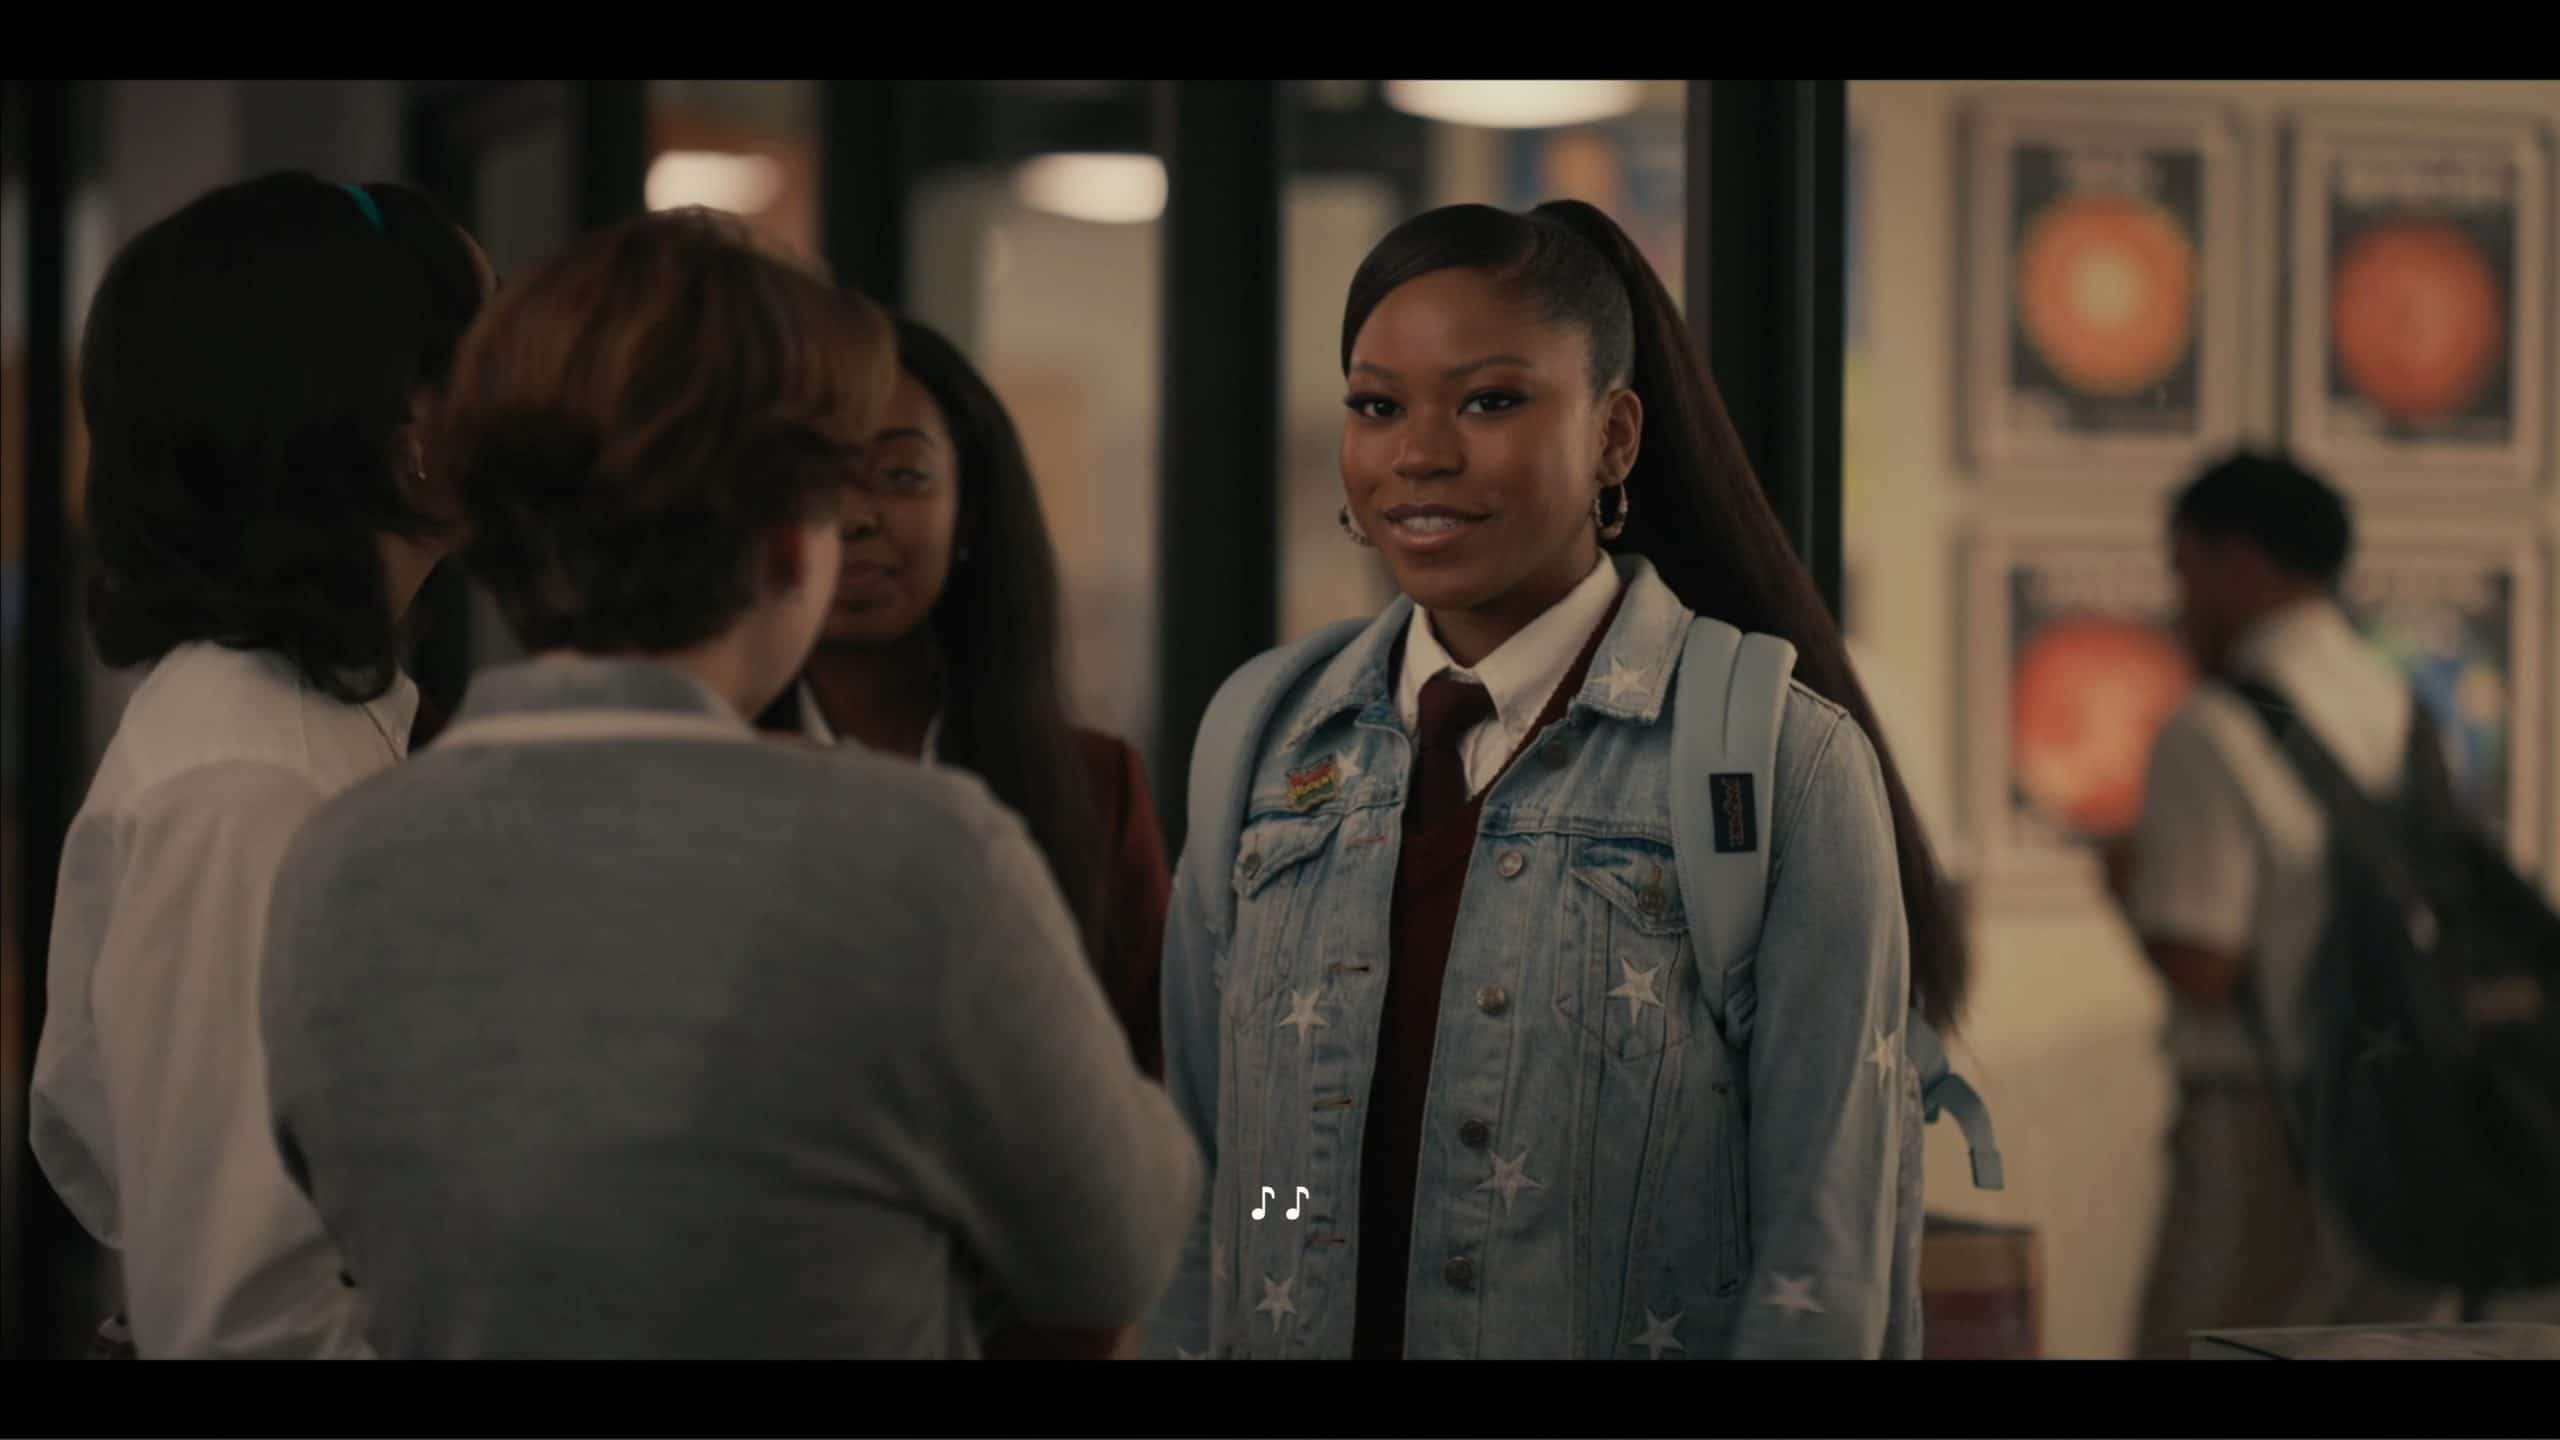 Riele Downs as Yazmin looking Carlton's direction